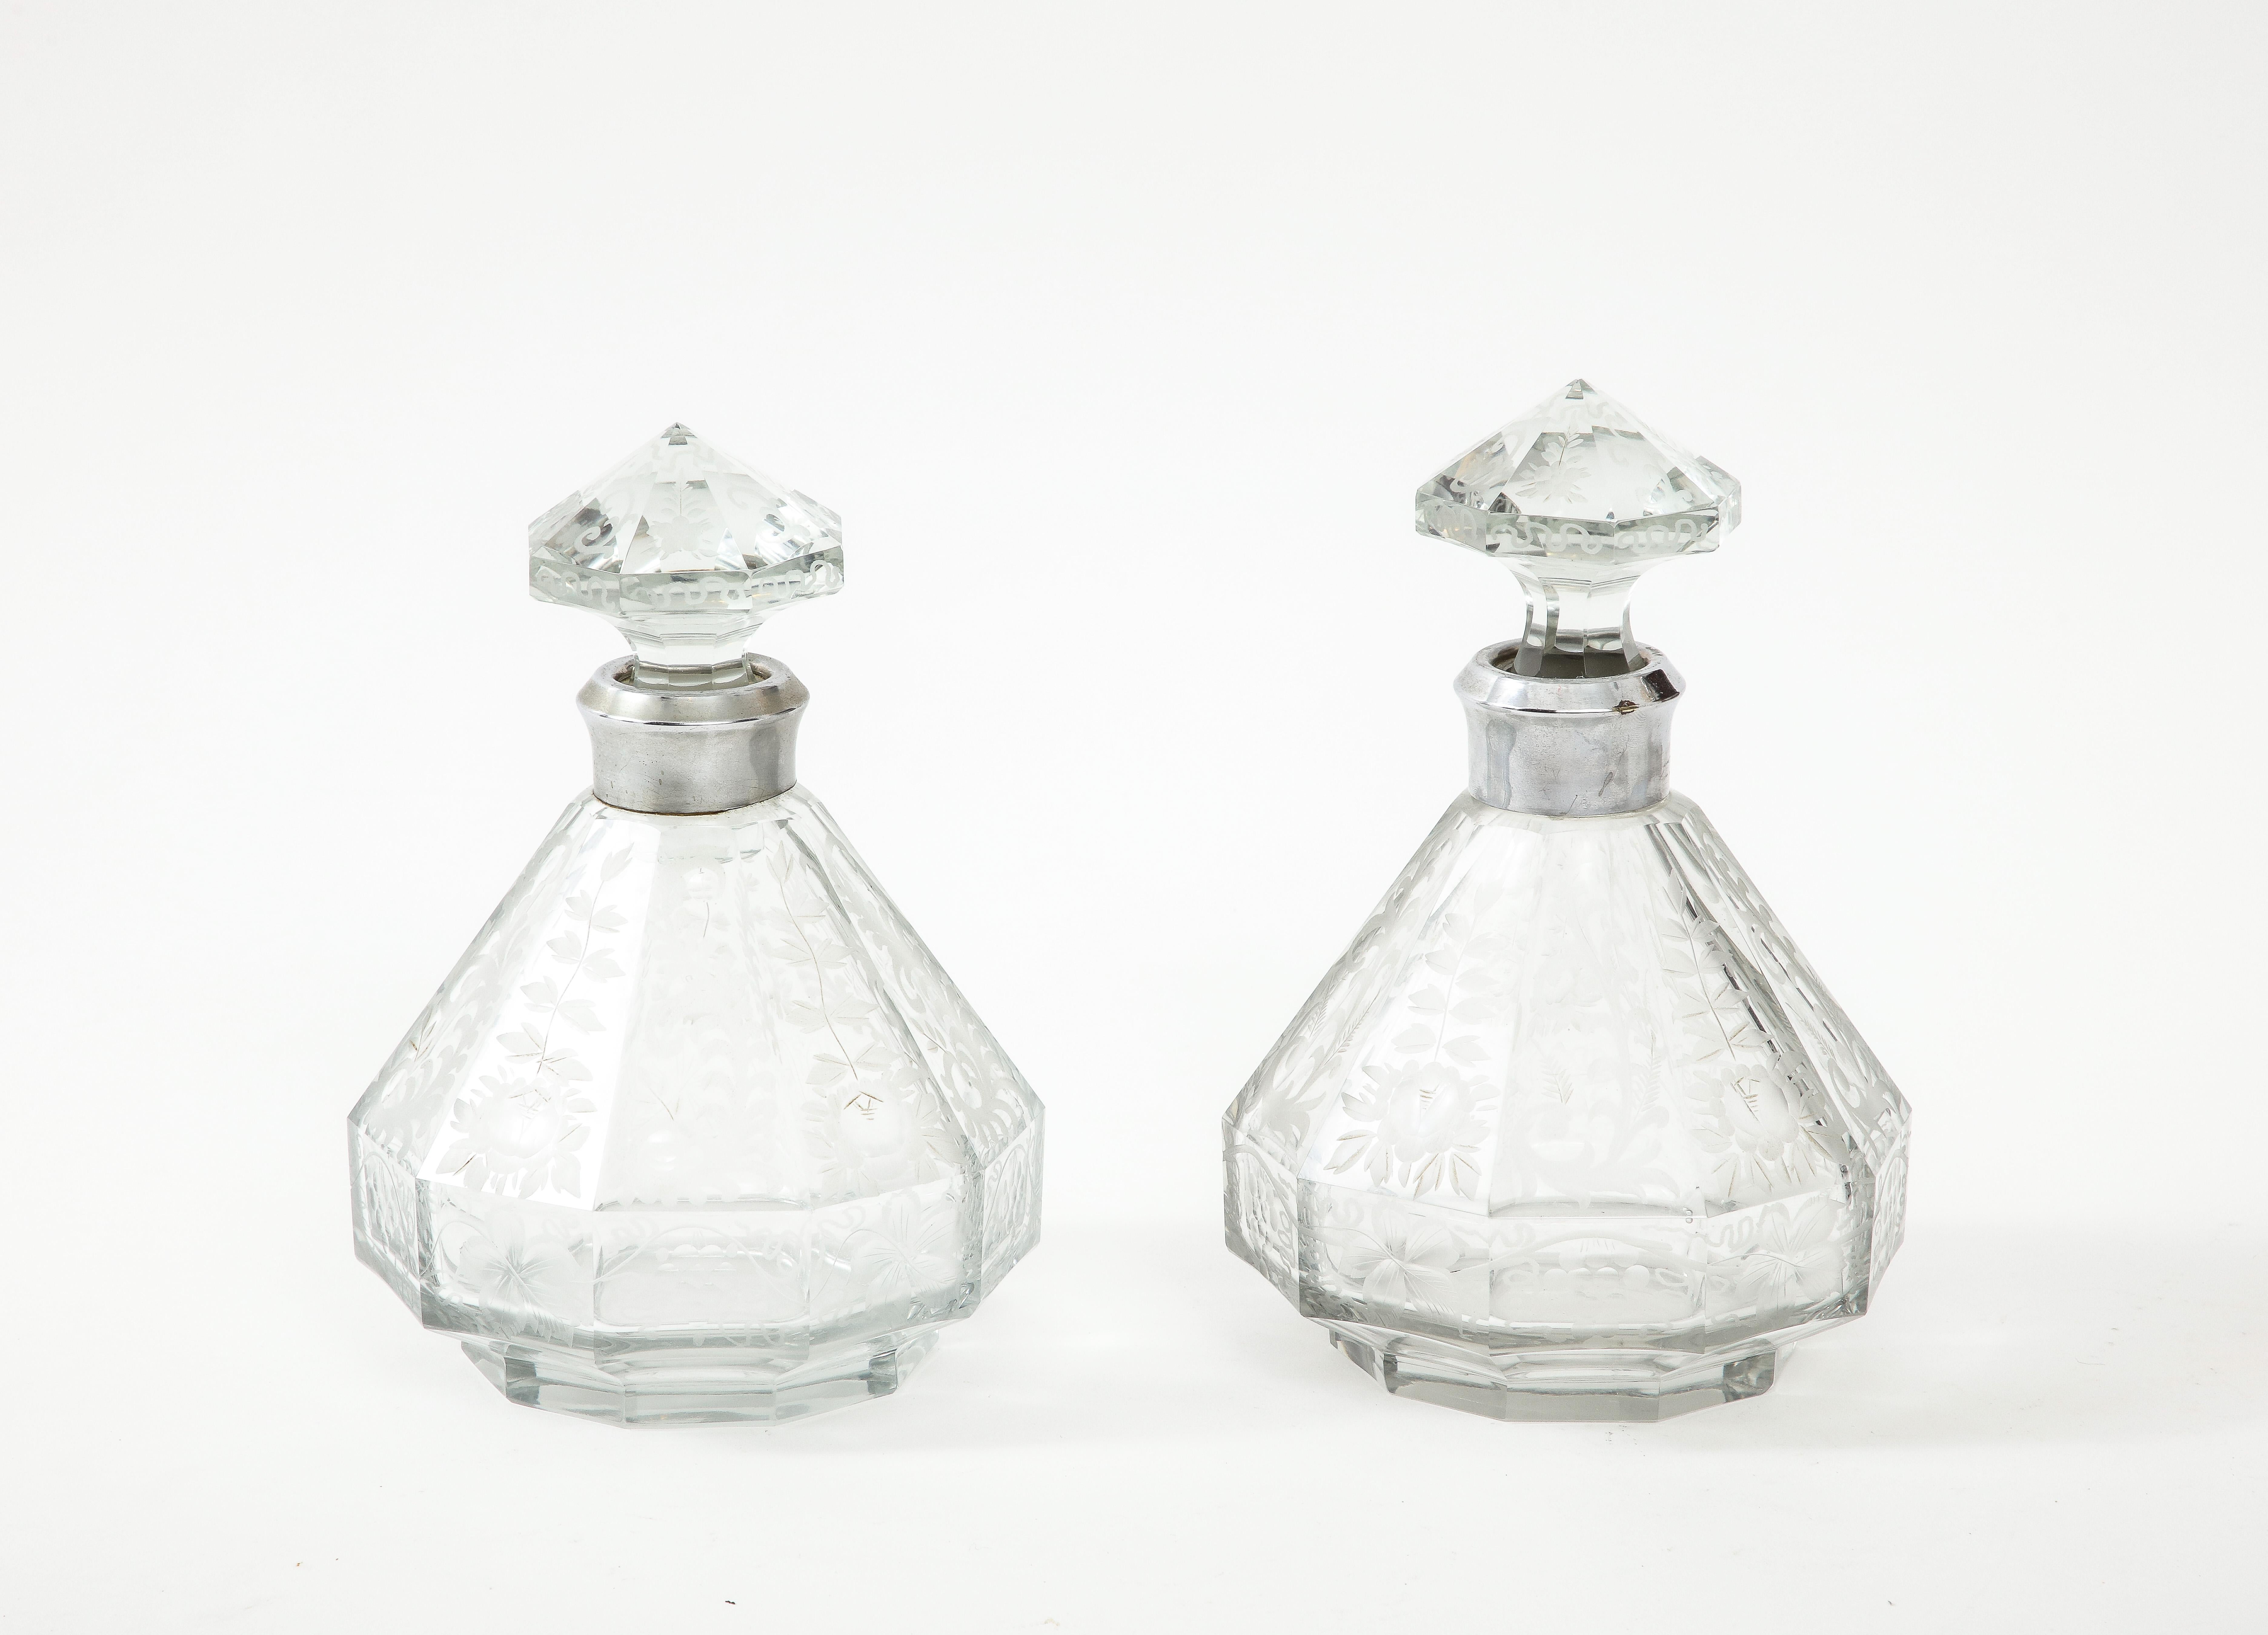 1940's etched glass decanters with stoppers, in vintage original condition with minor wear and patina due to age and use.